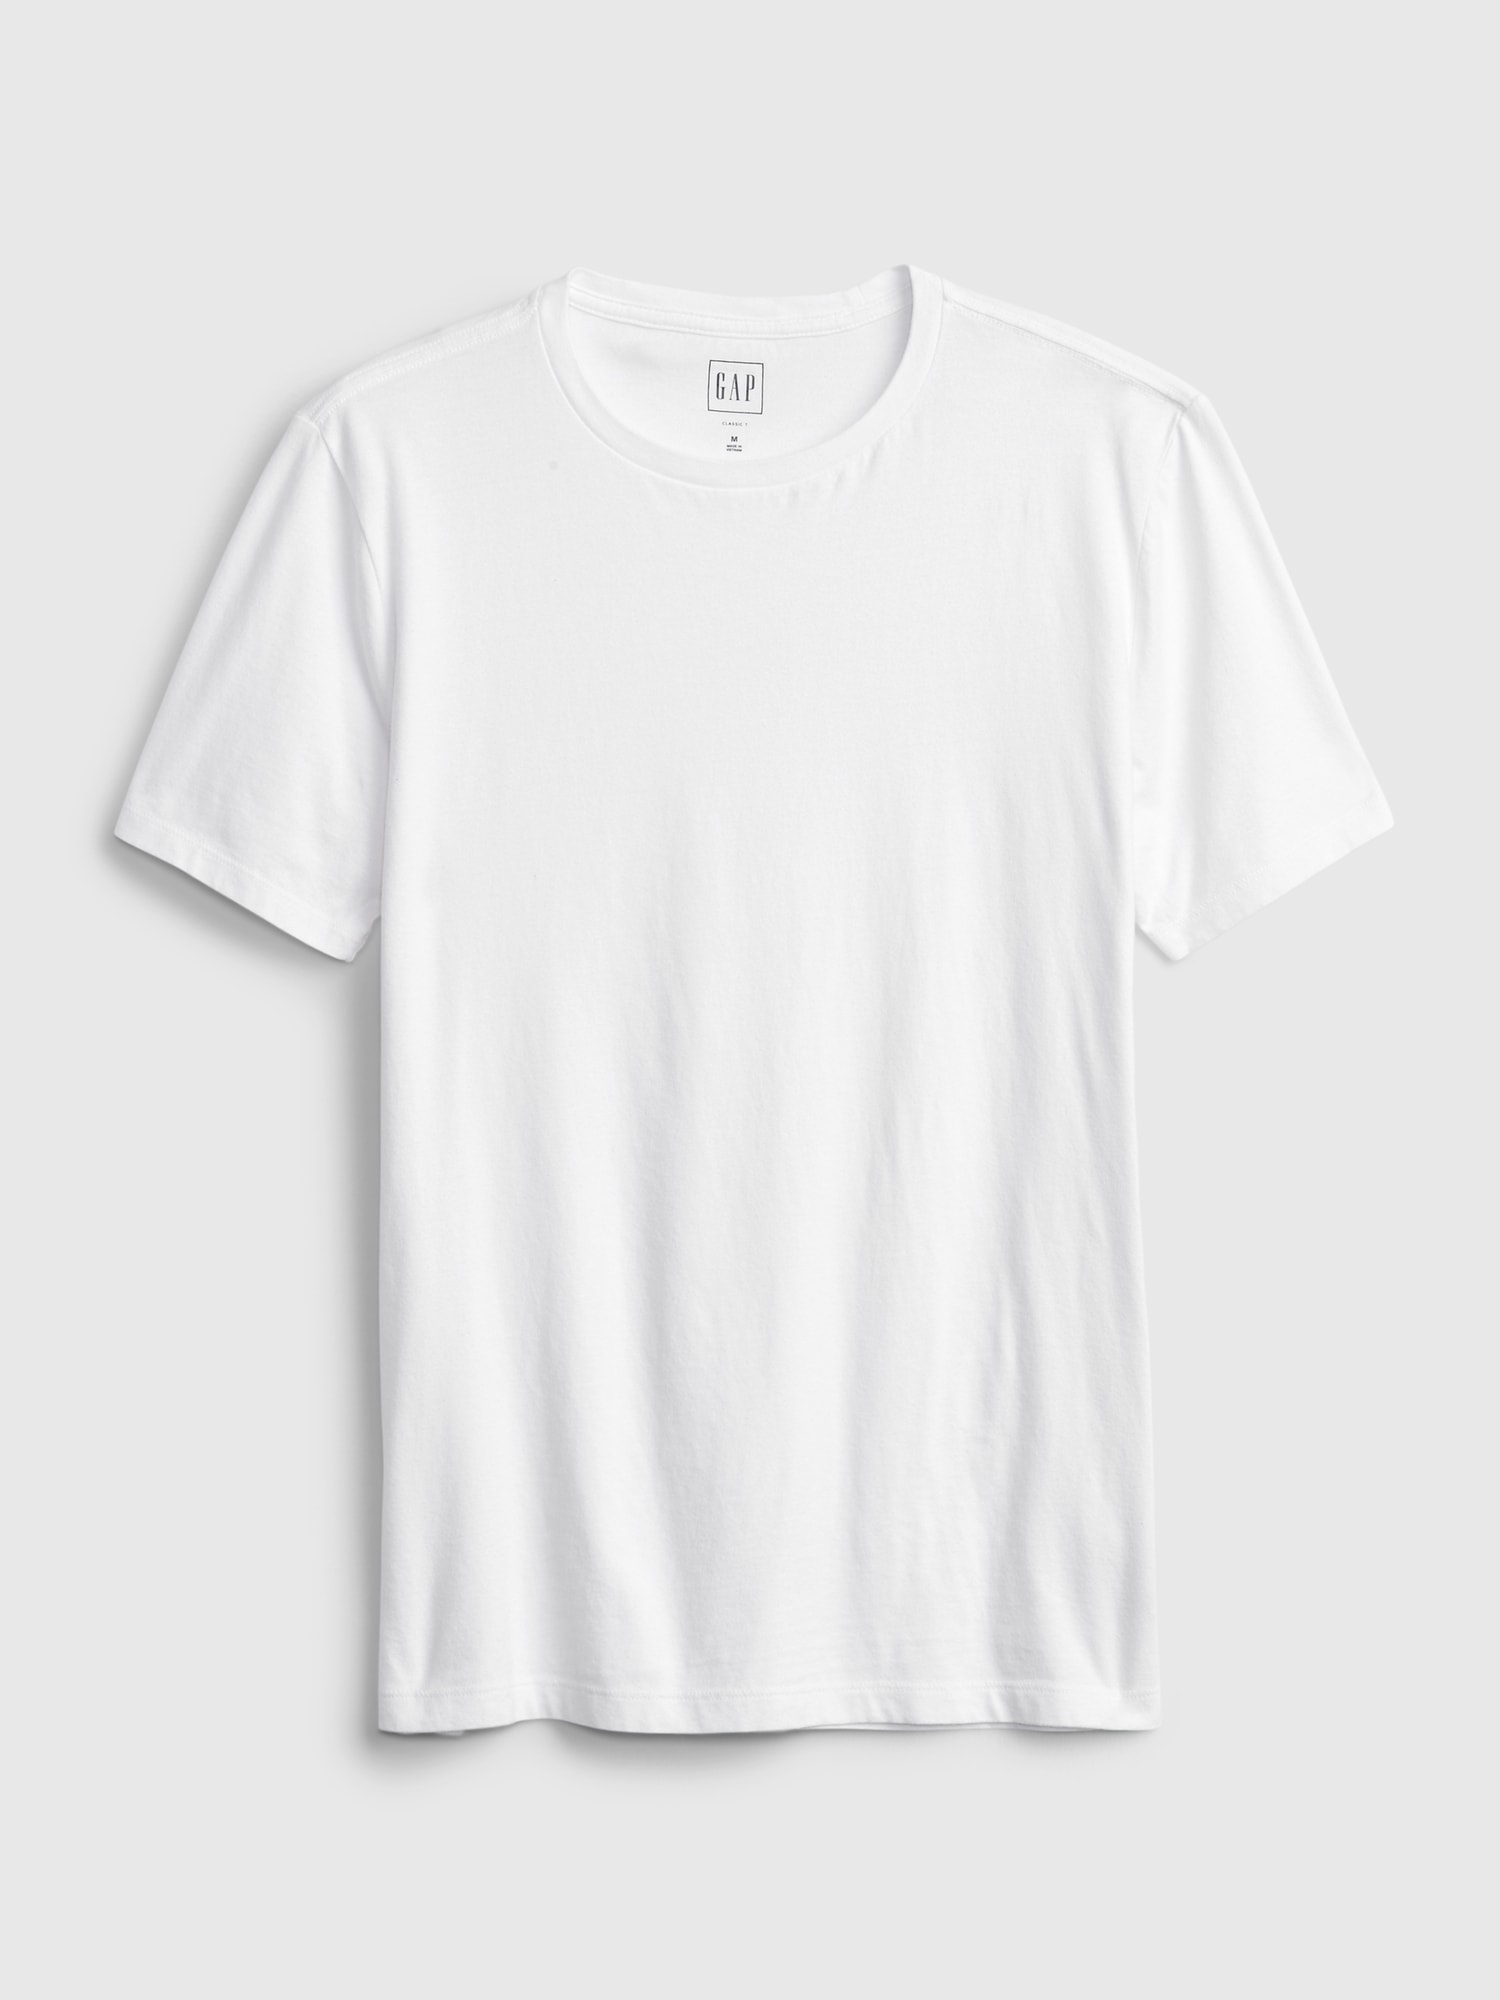 Classic Tee, Classic White T-Shirt, Ribbed Crew Neck